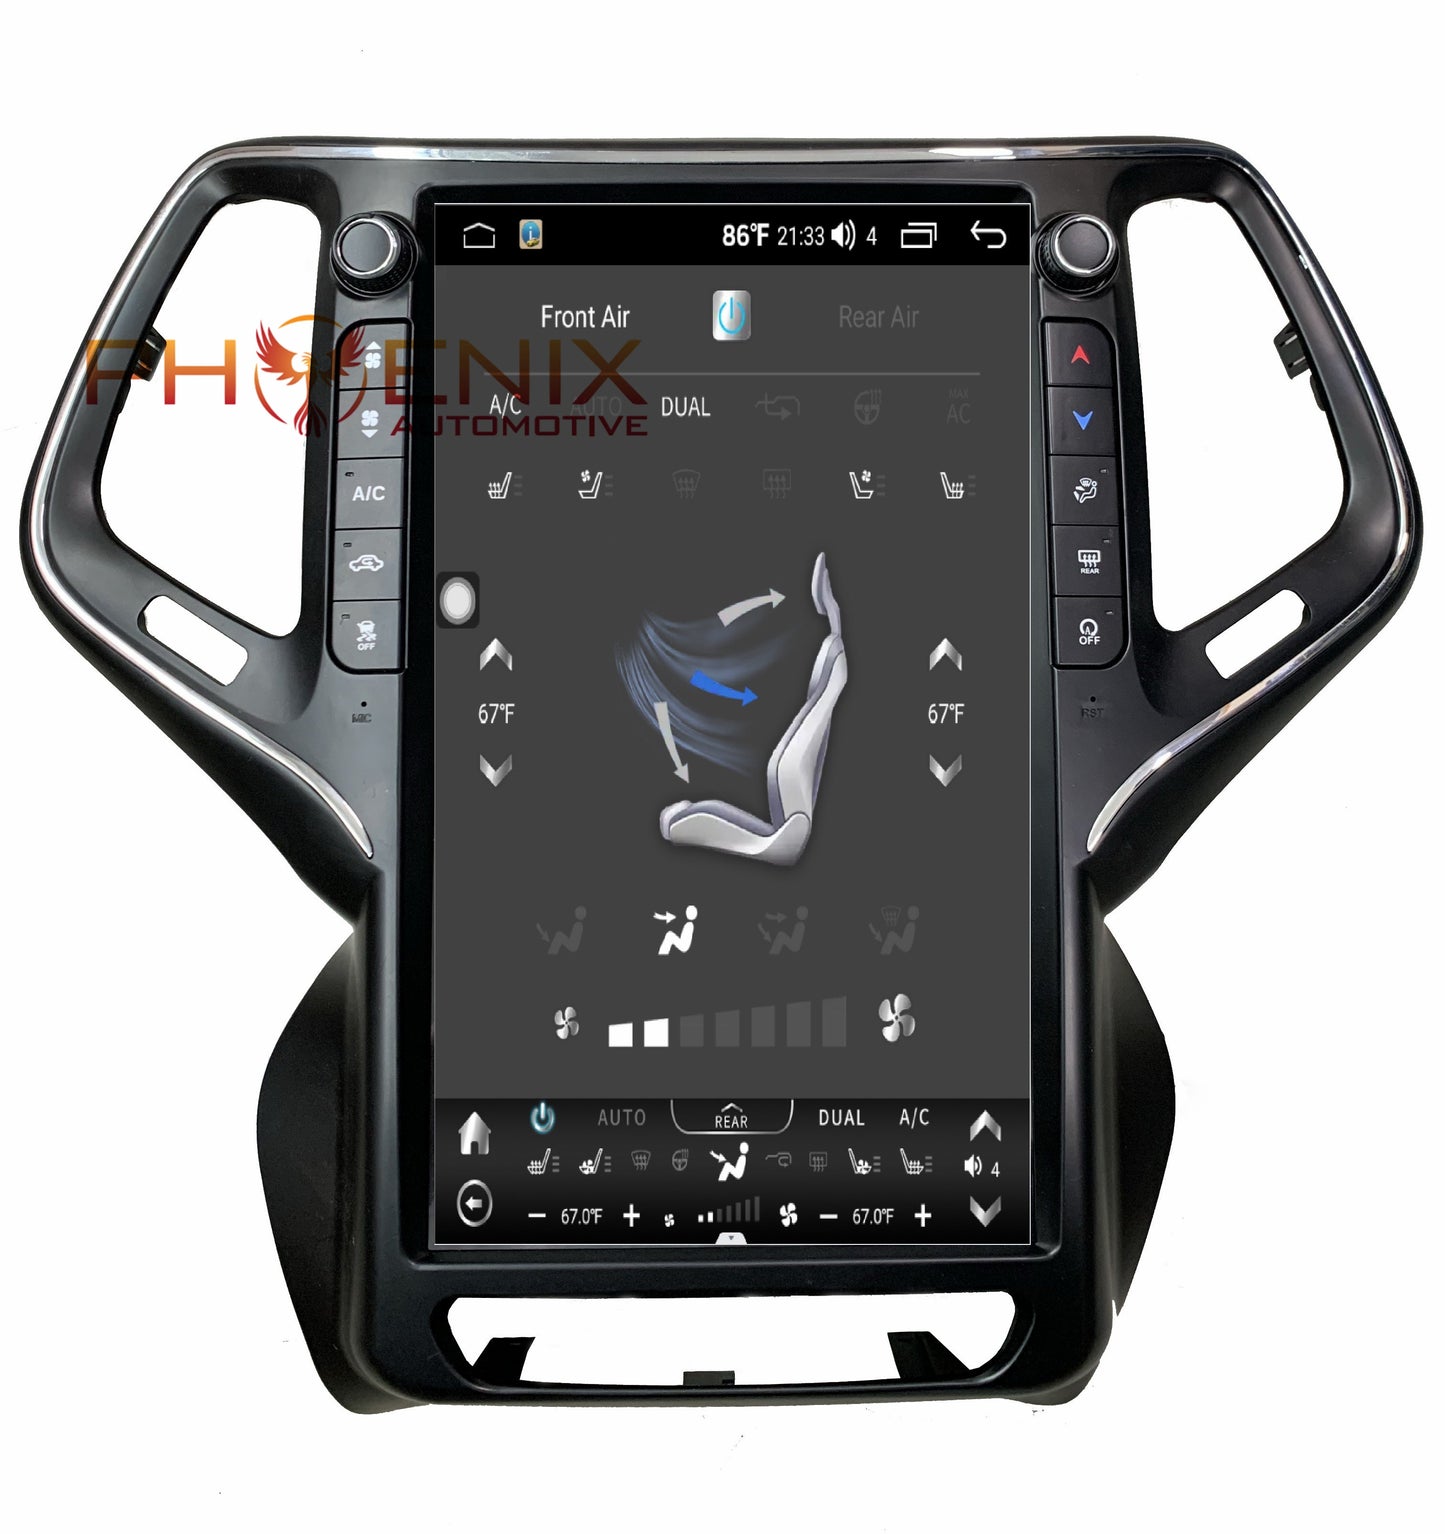 [Open box] 13.6" Vertical Screen Android 10 Fast boot Navigation Radio for Jeep Cherokee 2014 - 2021 - Smart Car Stereo Radio Navigation | In-Dash audio/video players online - Phoenix Automot